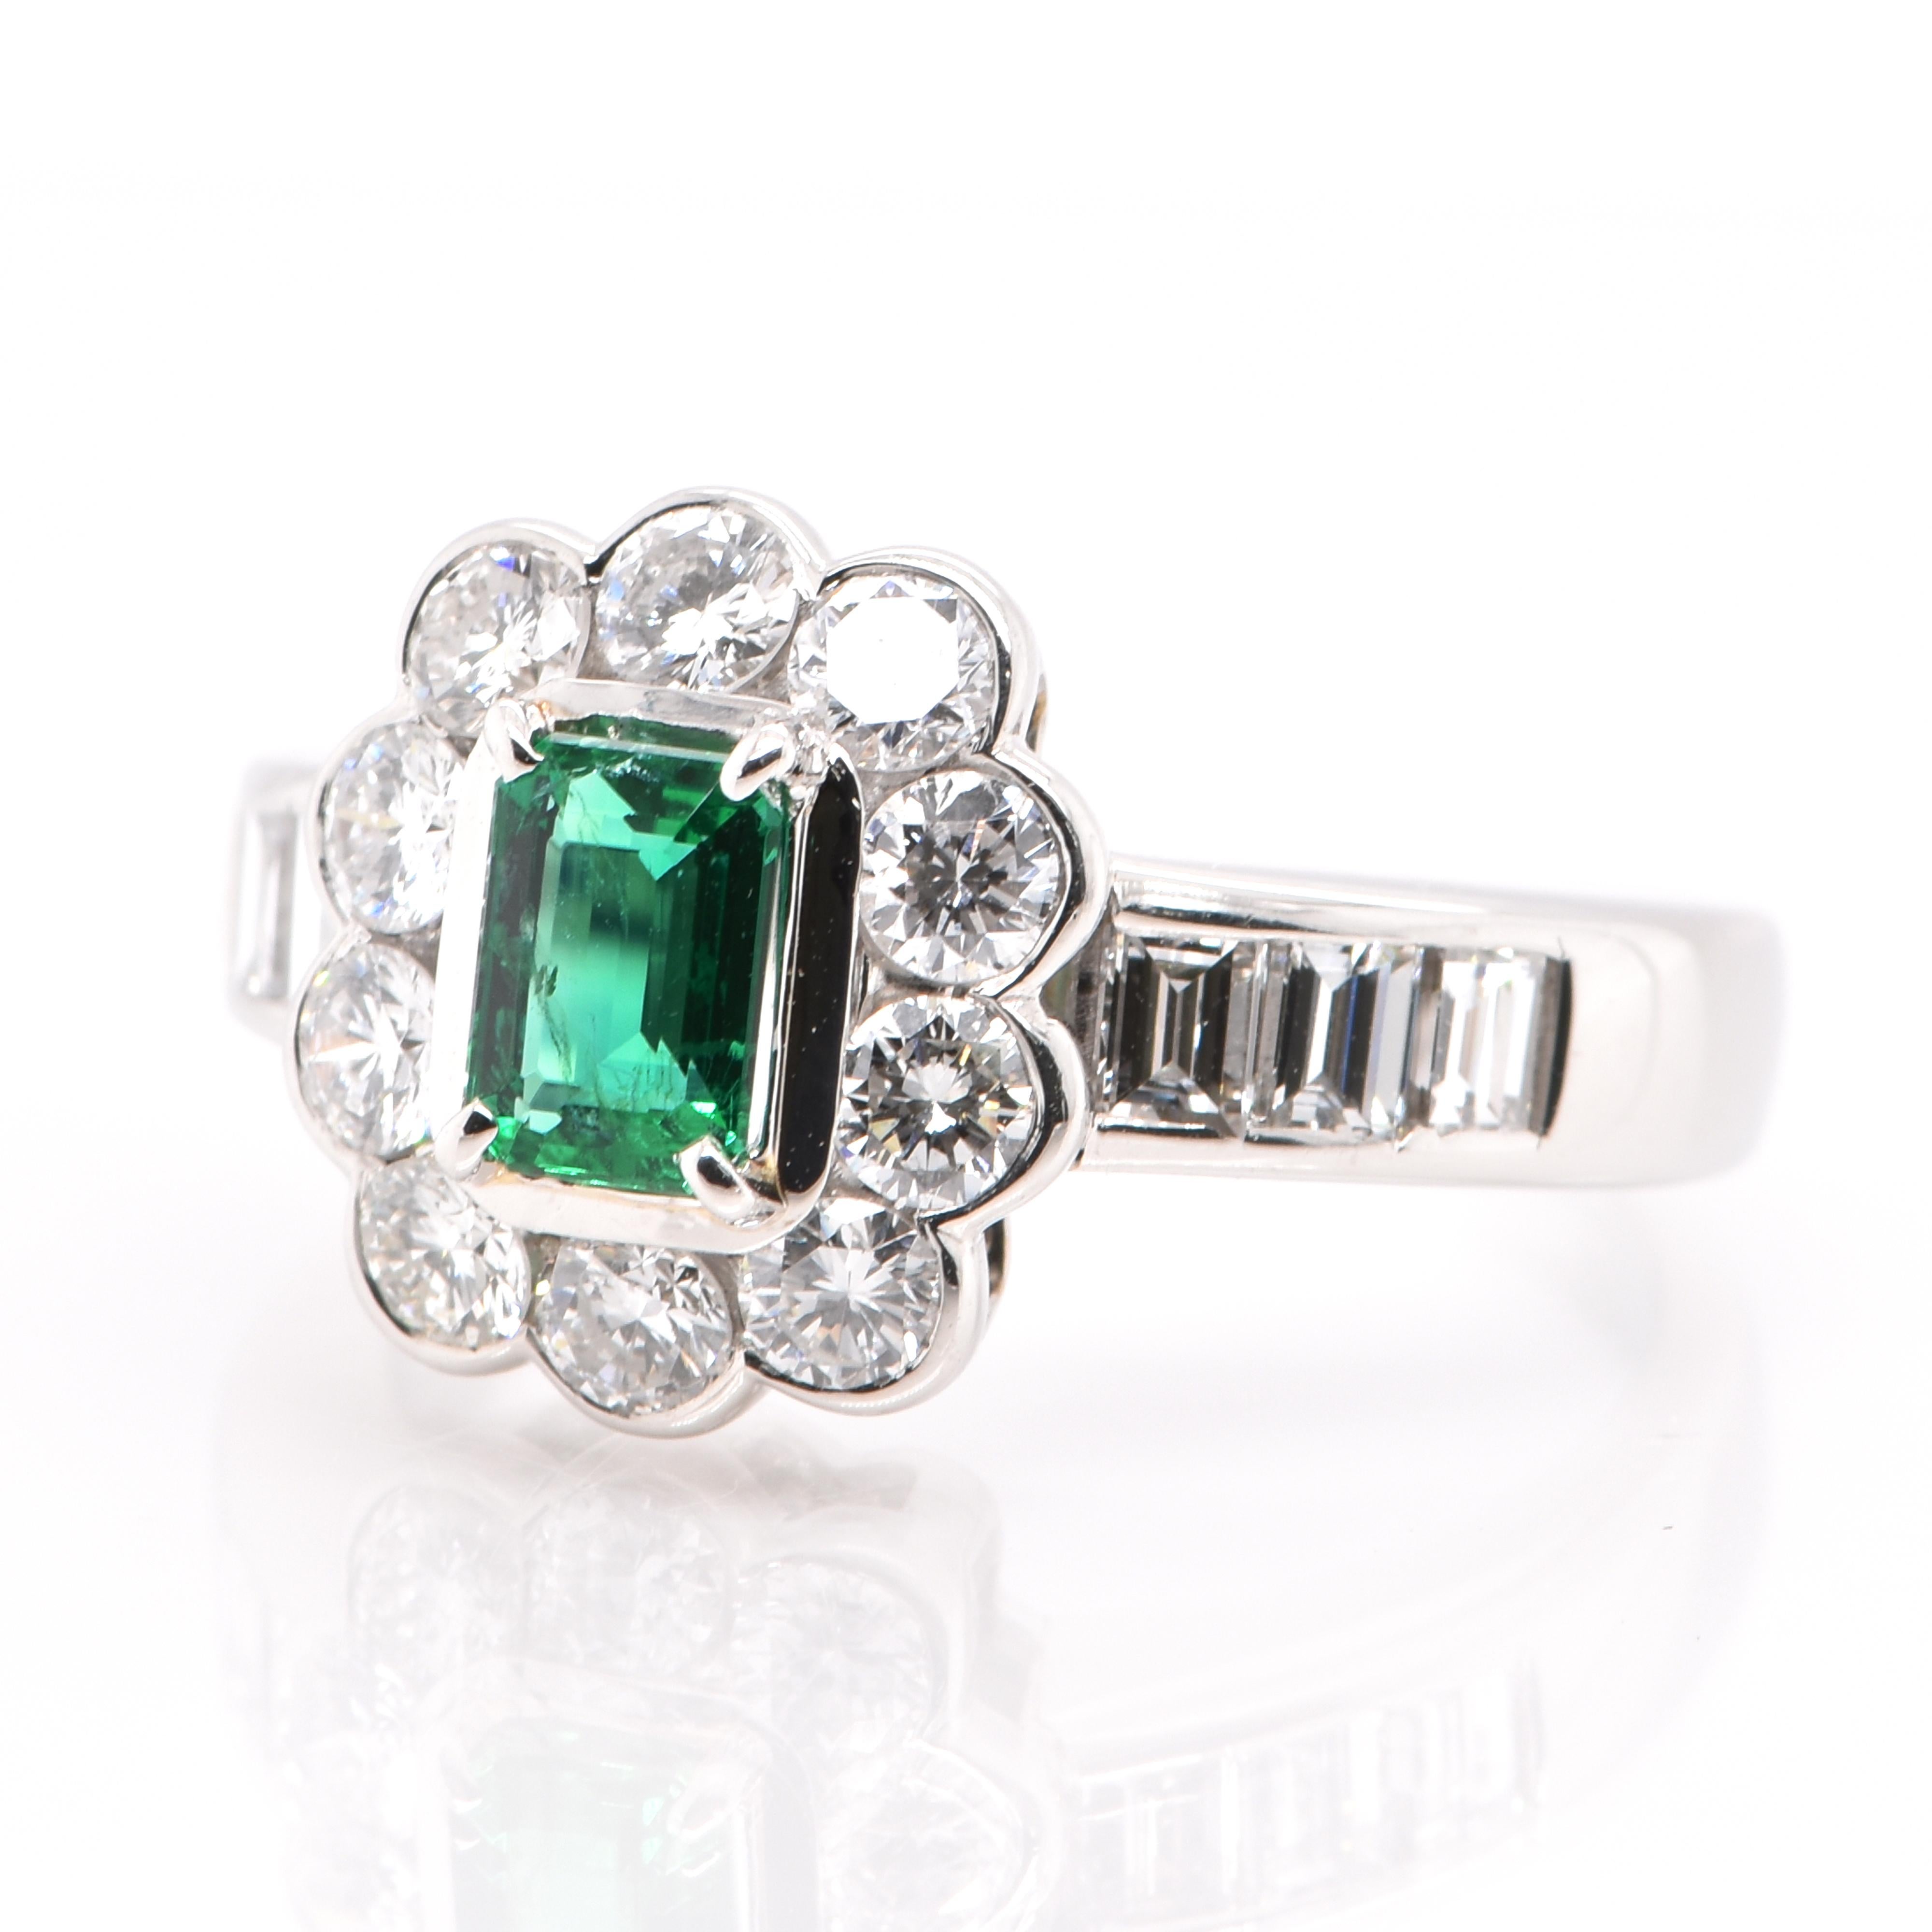 A stunning Ring featuring a 0.53 Carat, Natural, Vivid-Green, Colombian Emerald and 1.40 Carats of Diamond Accents set in Platinum. People have admired emerald’s green for thousands of years. Emeralds have always been associated with the lushest